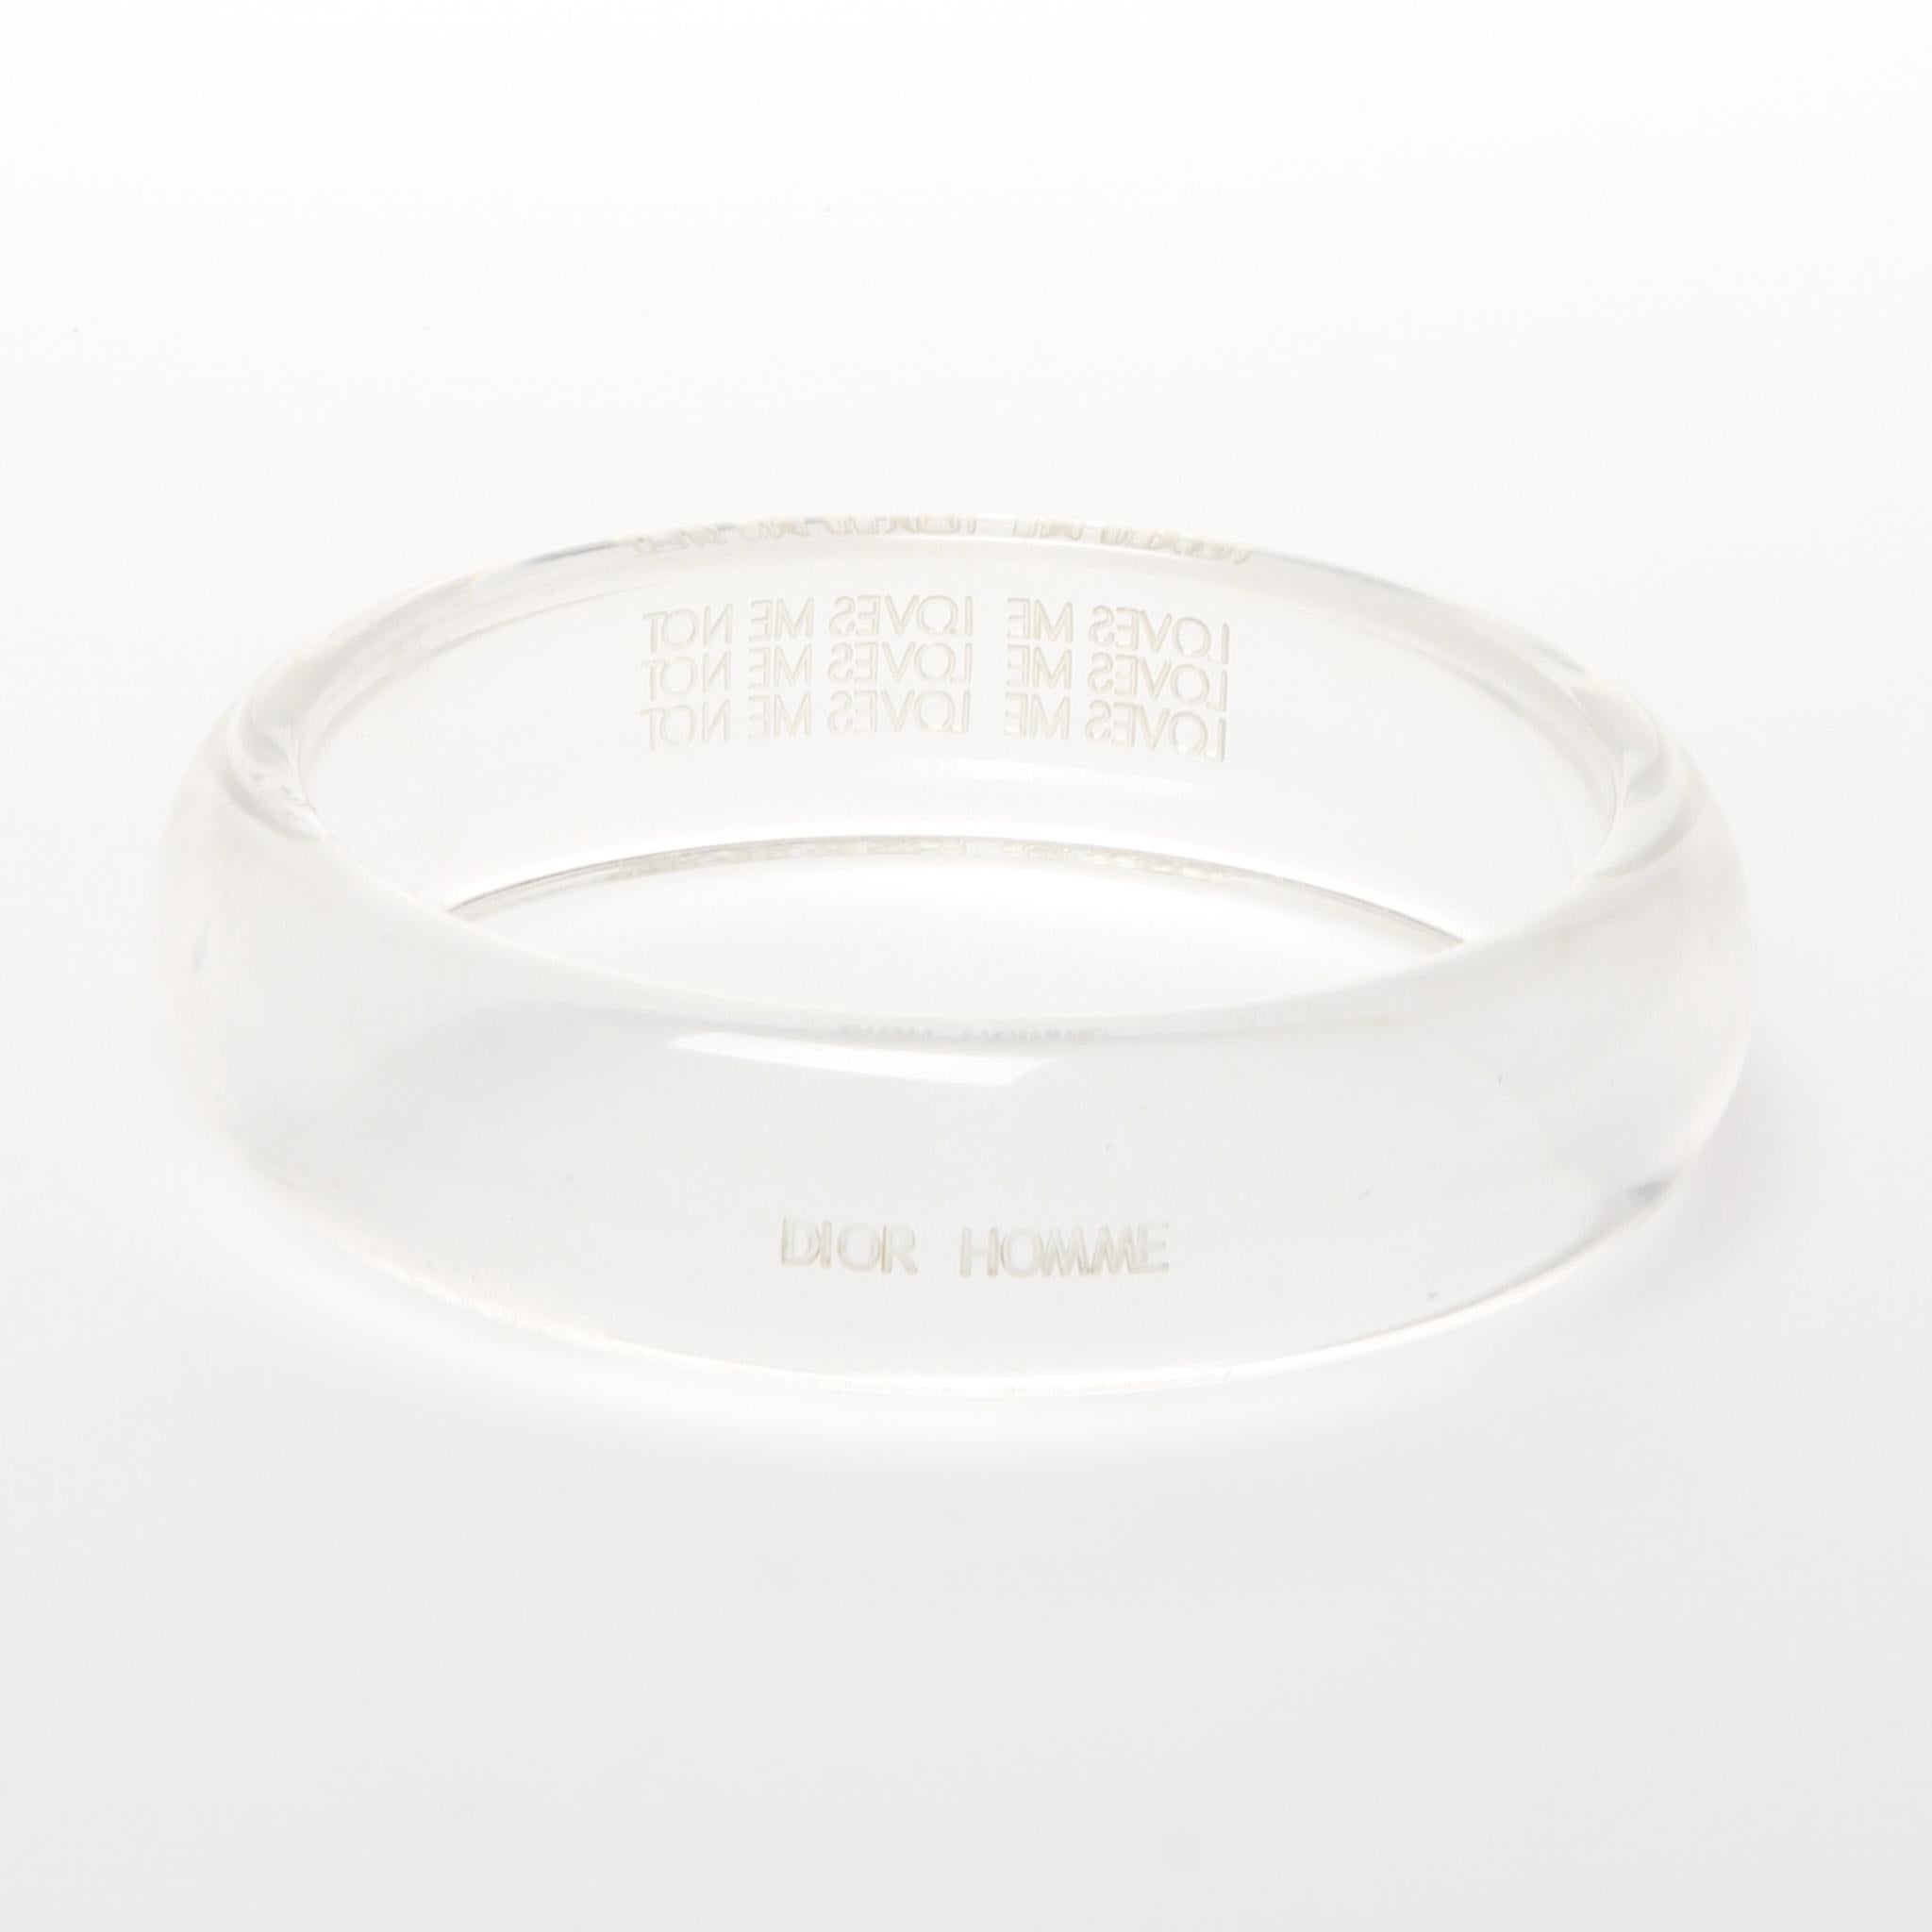 Rare Dior Homme bangle from Heidi Slimane's SS07 debut collection. Laser engraved with DIOR HOMME and LOVES ME LOVES ME NOT. 